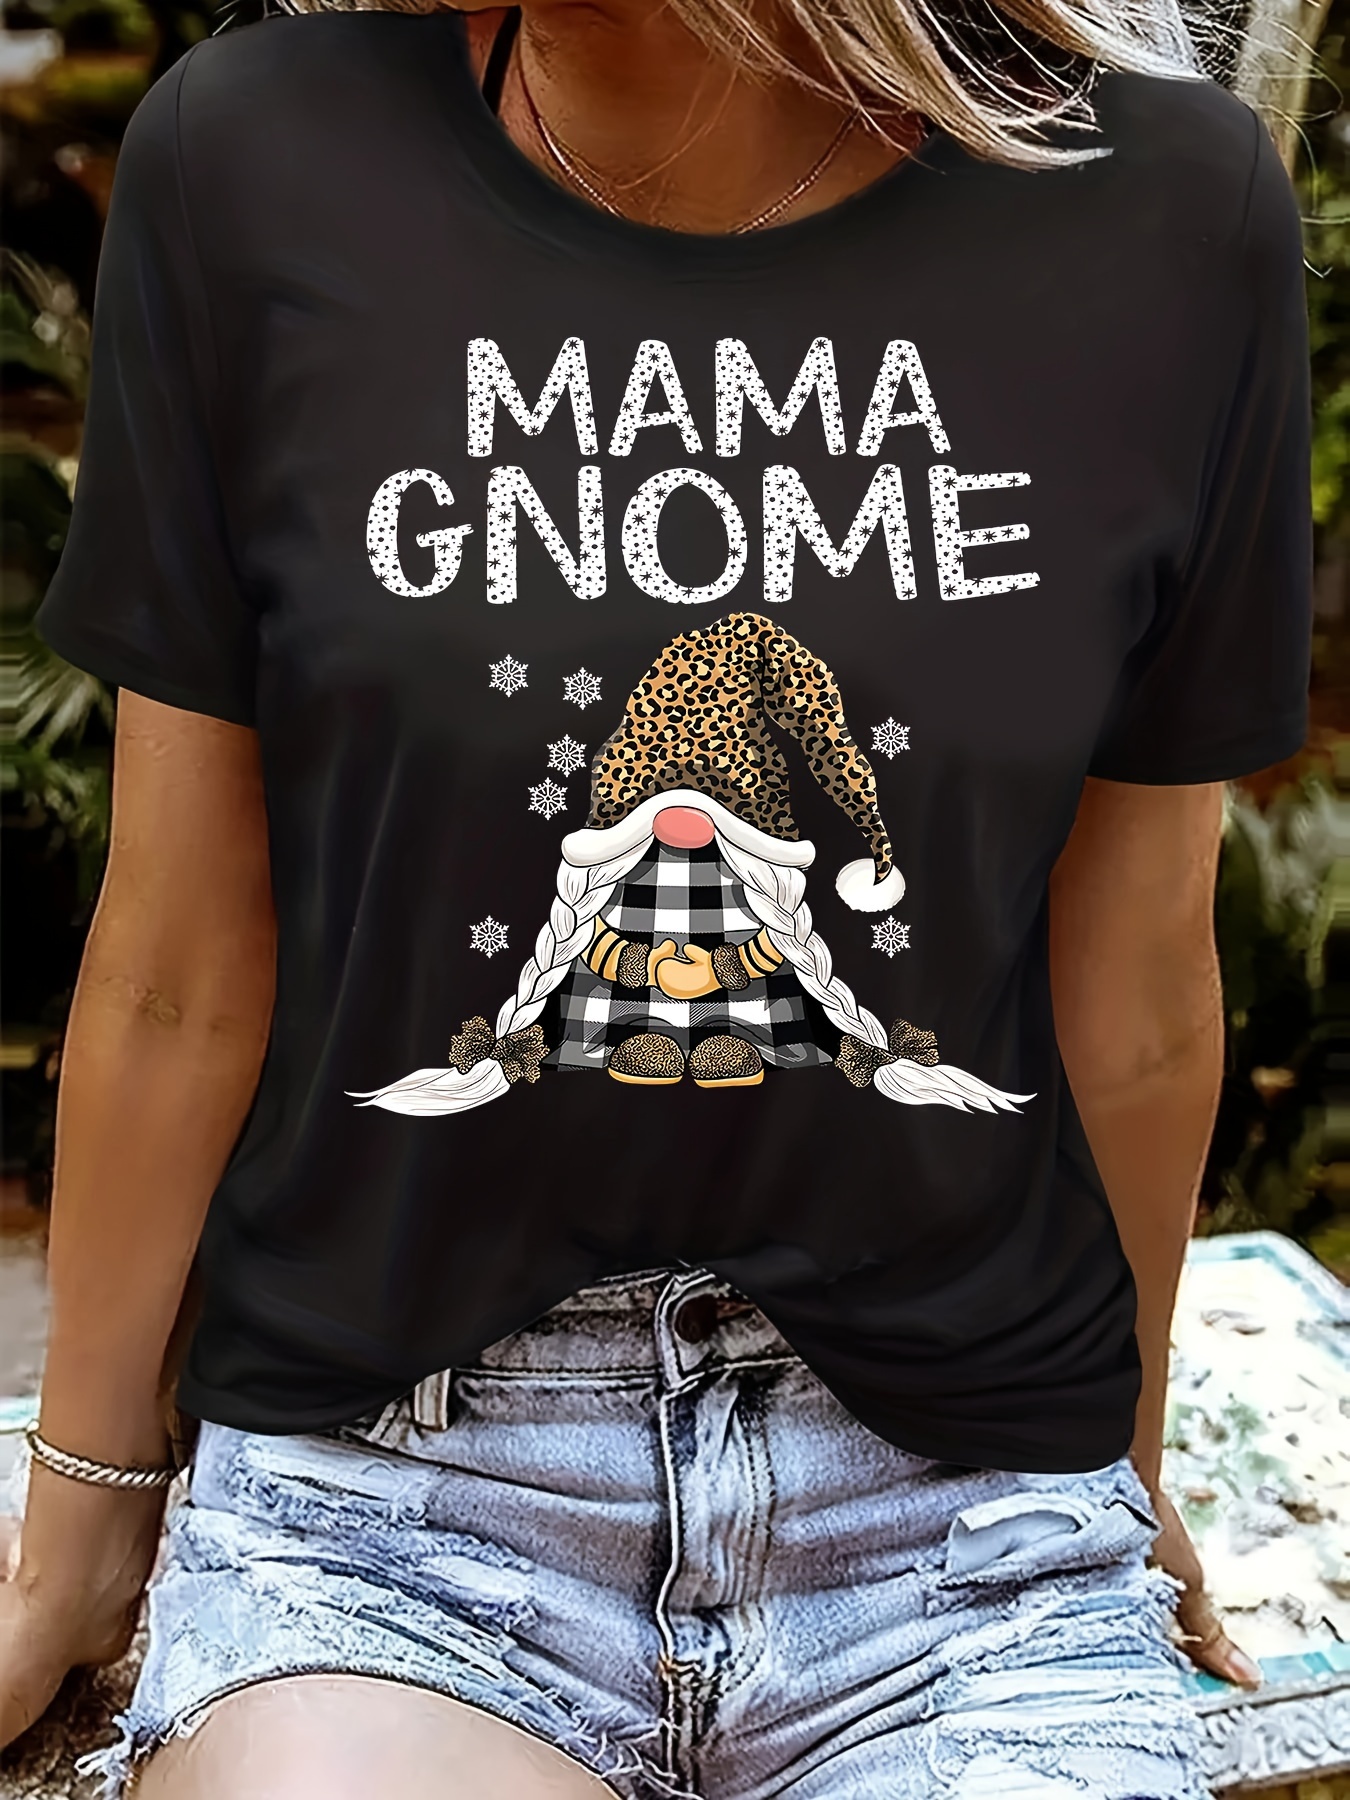 Valentine's Day T-Shirt for Women Gnome Shirts Valentine's Day Shirt for  Women Buffalo Plaid Gnomes T-Shirt Cute Love Heart Graphic Printed Tees  Tops Fashion Cute Valentine top for Women at  Women's